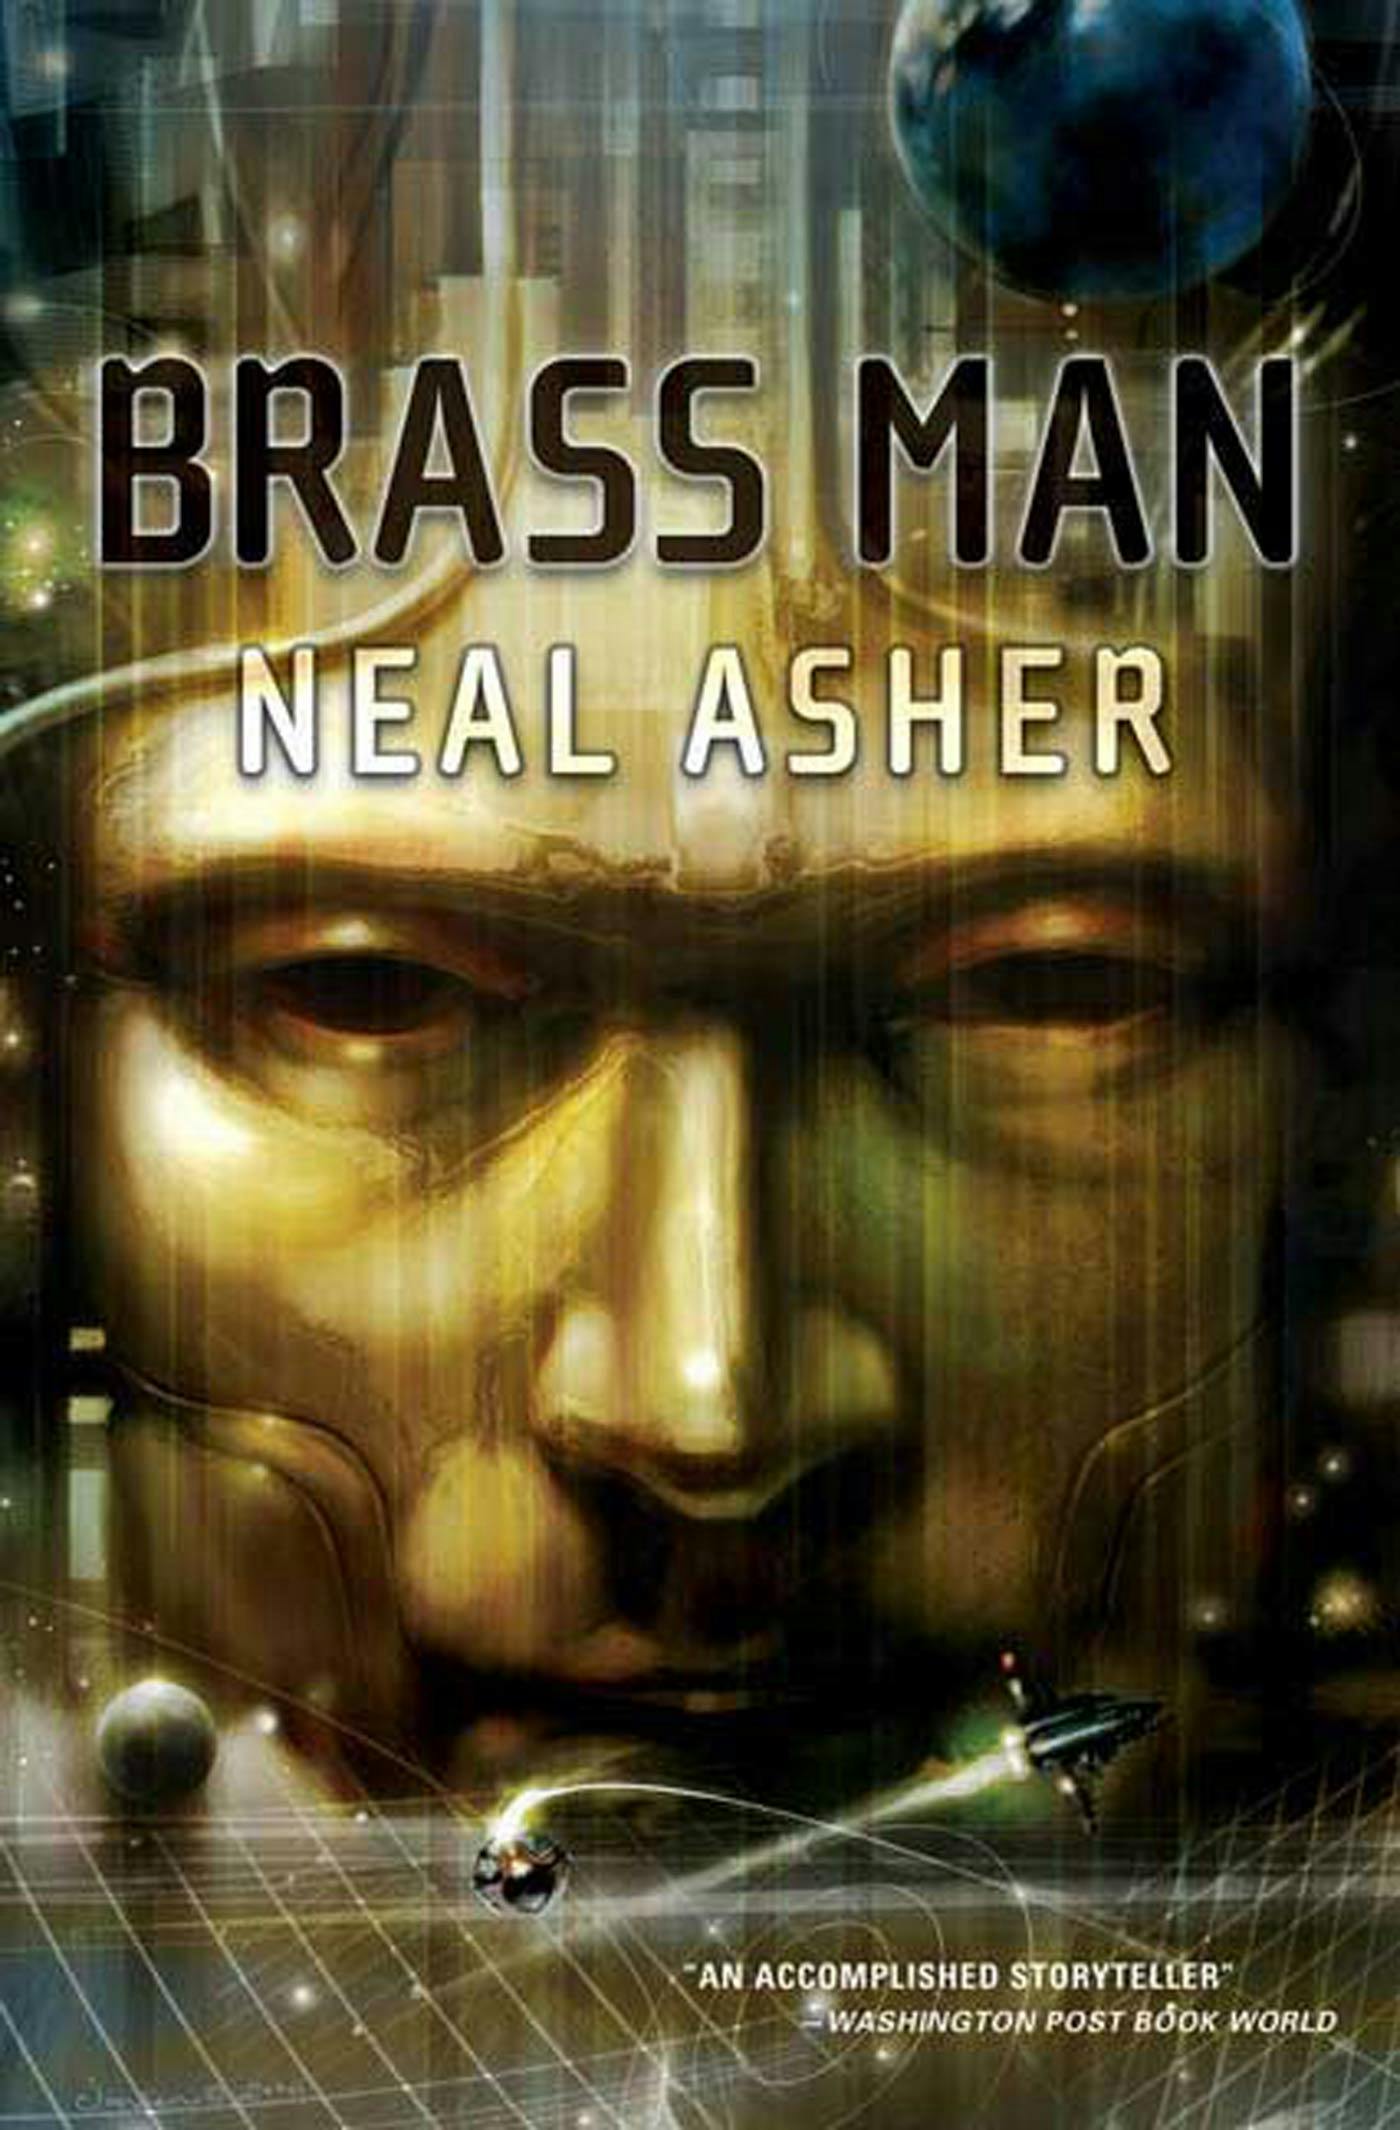 Cover for the book titled as: Brass Man